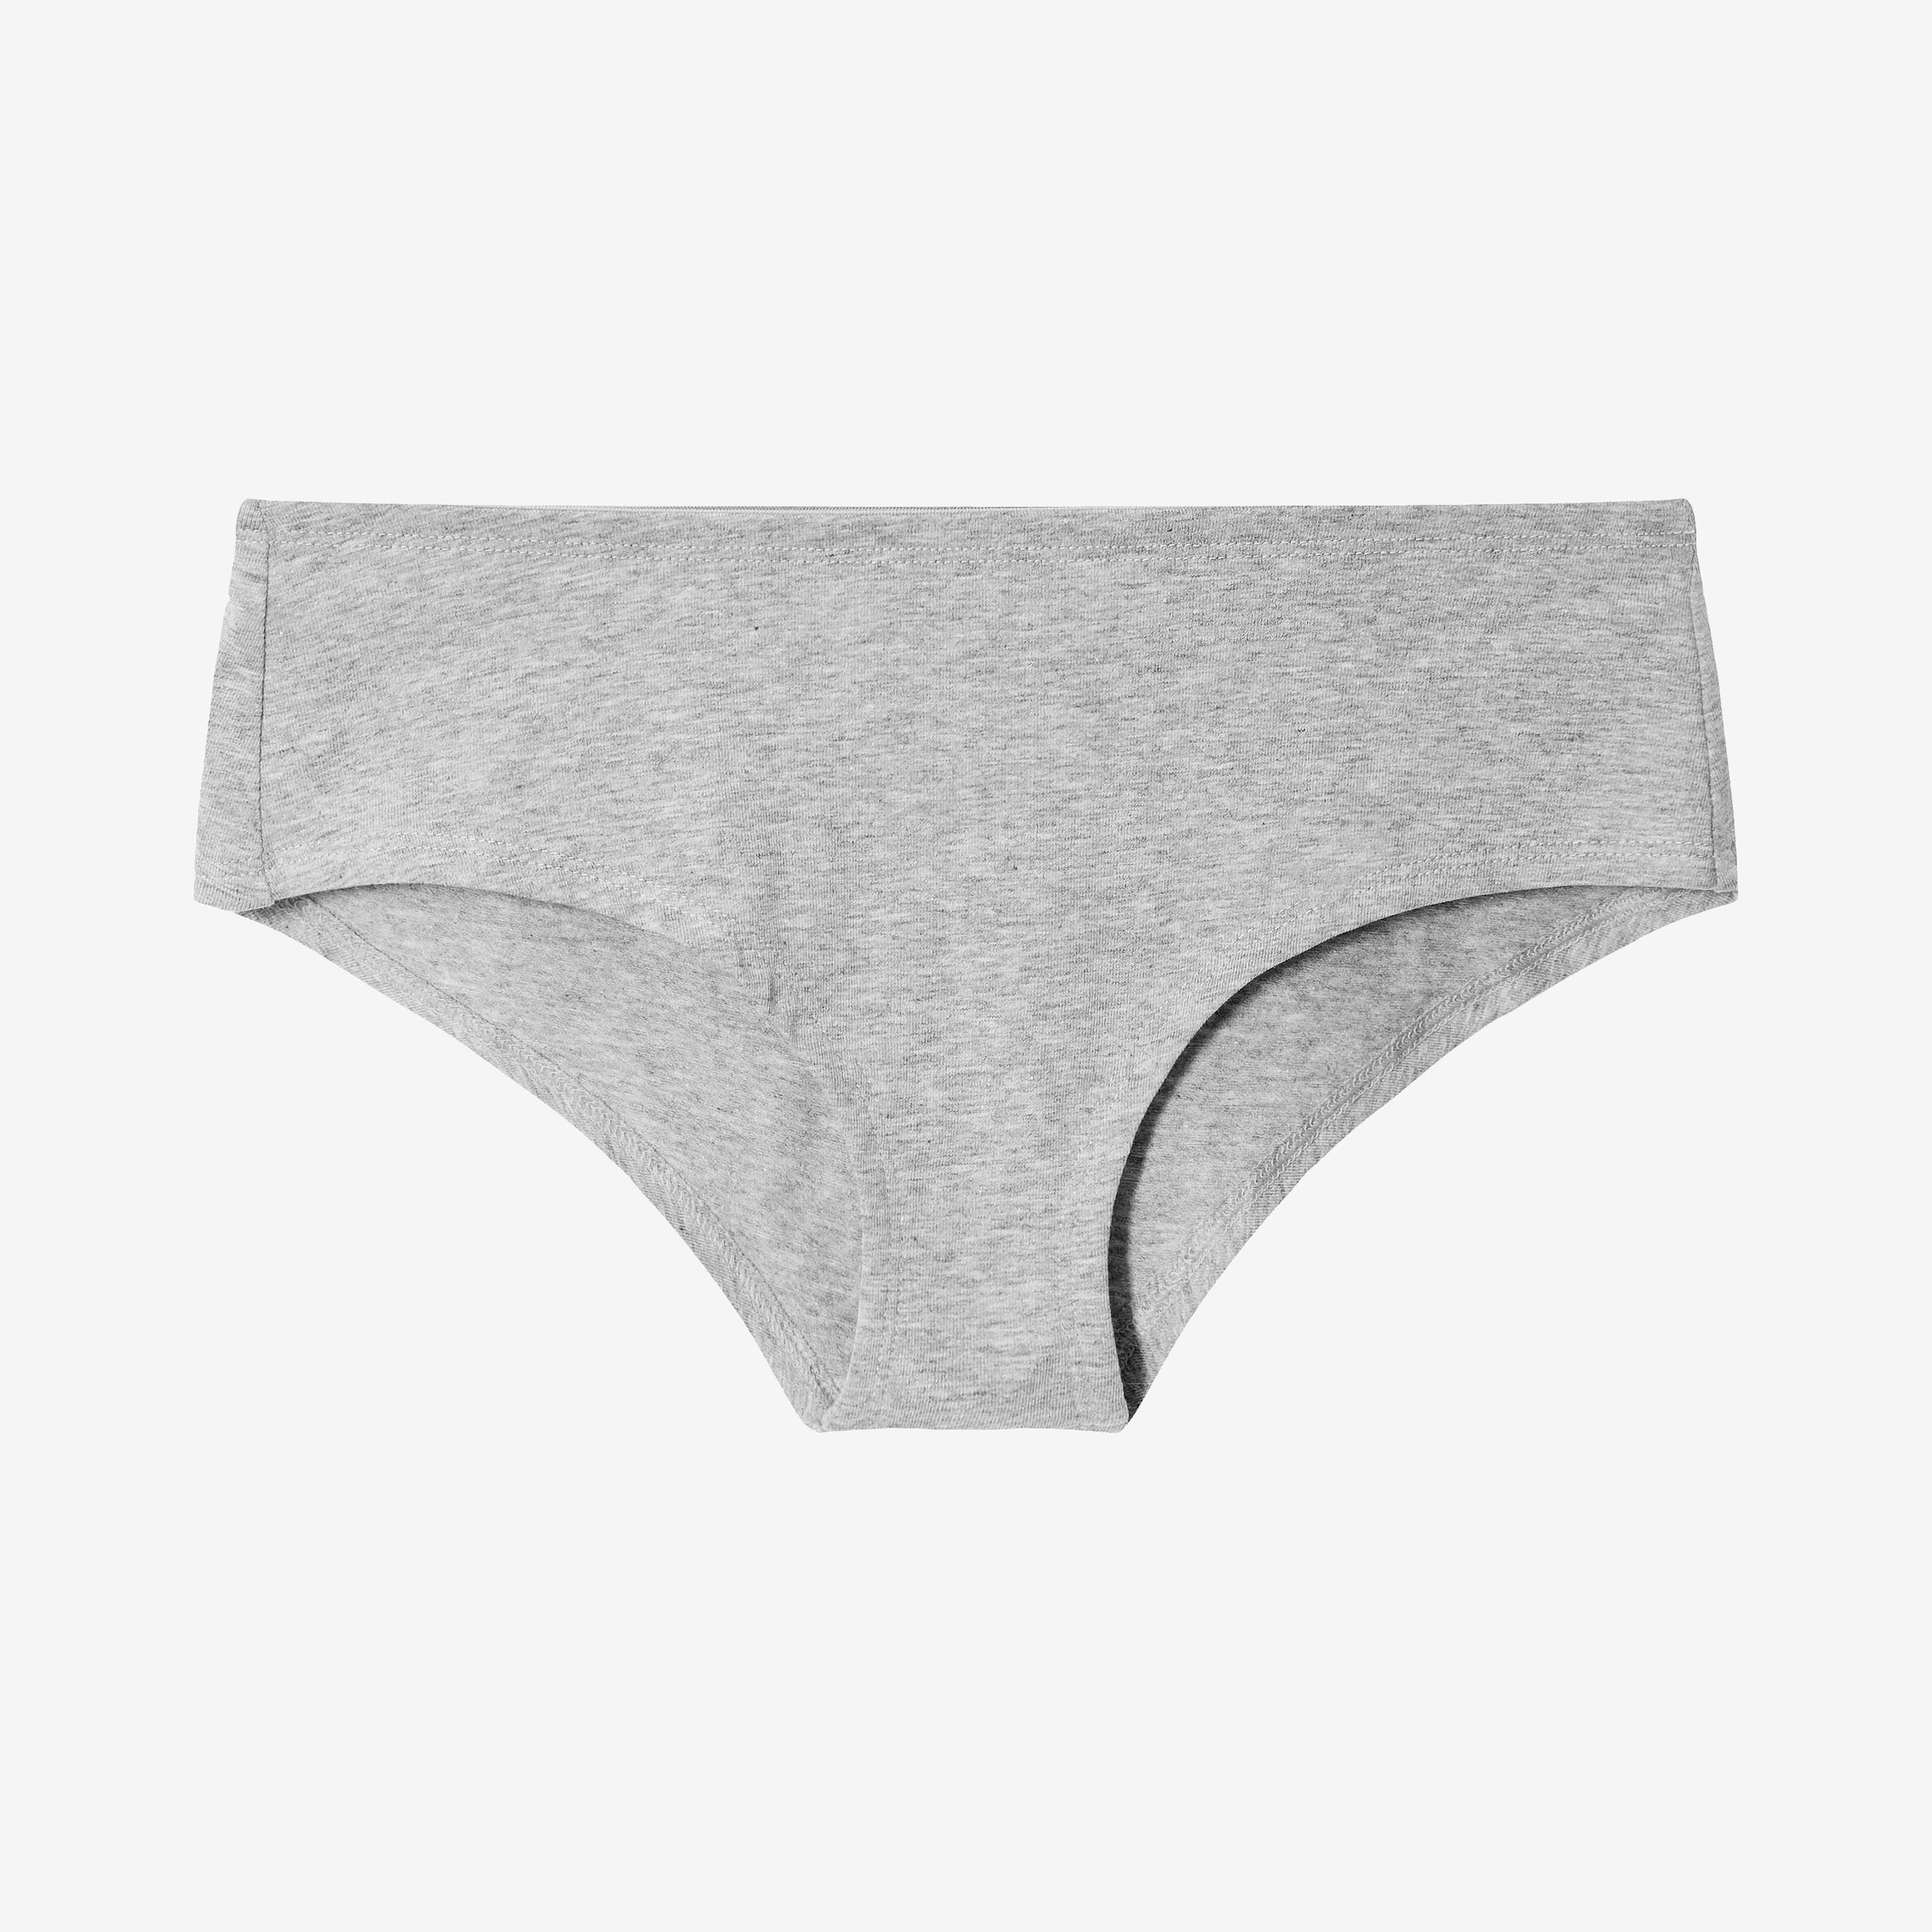 Hipster panties from Bread & Boxers - Bread & Boxers